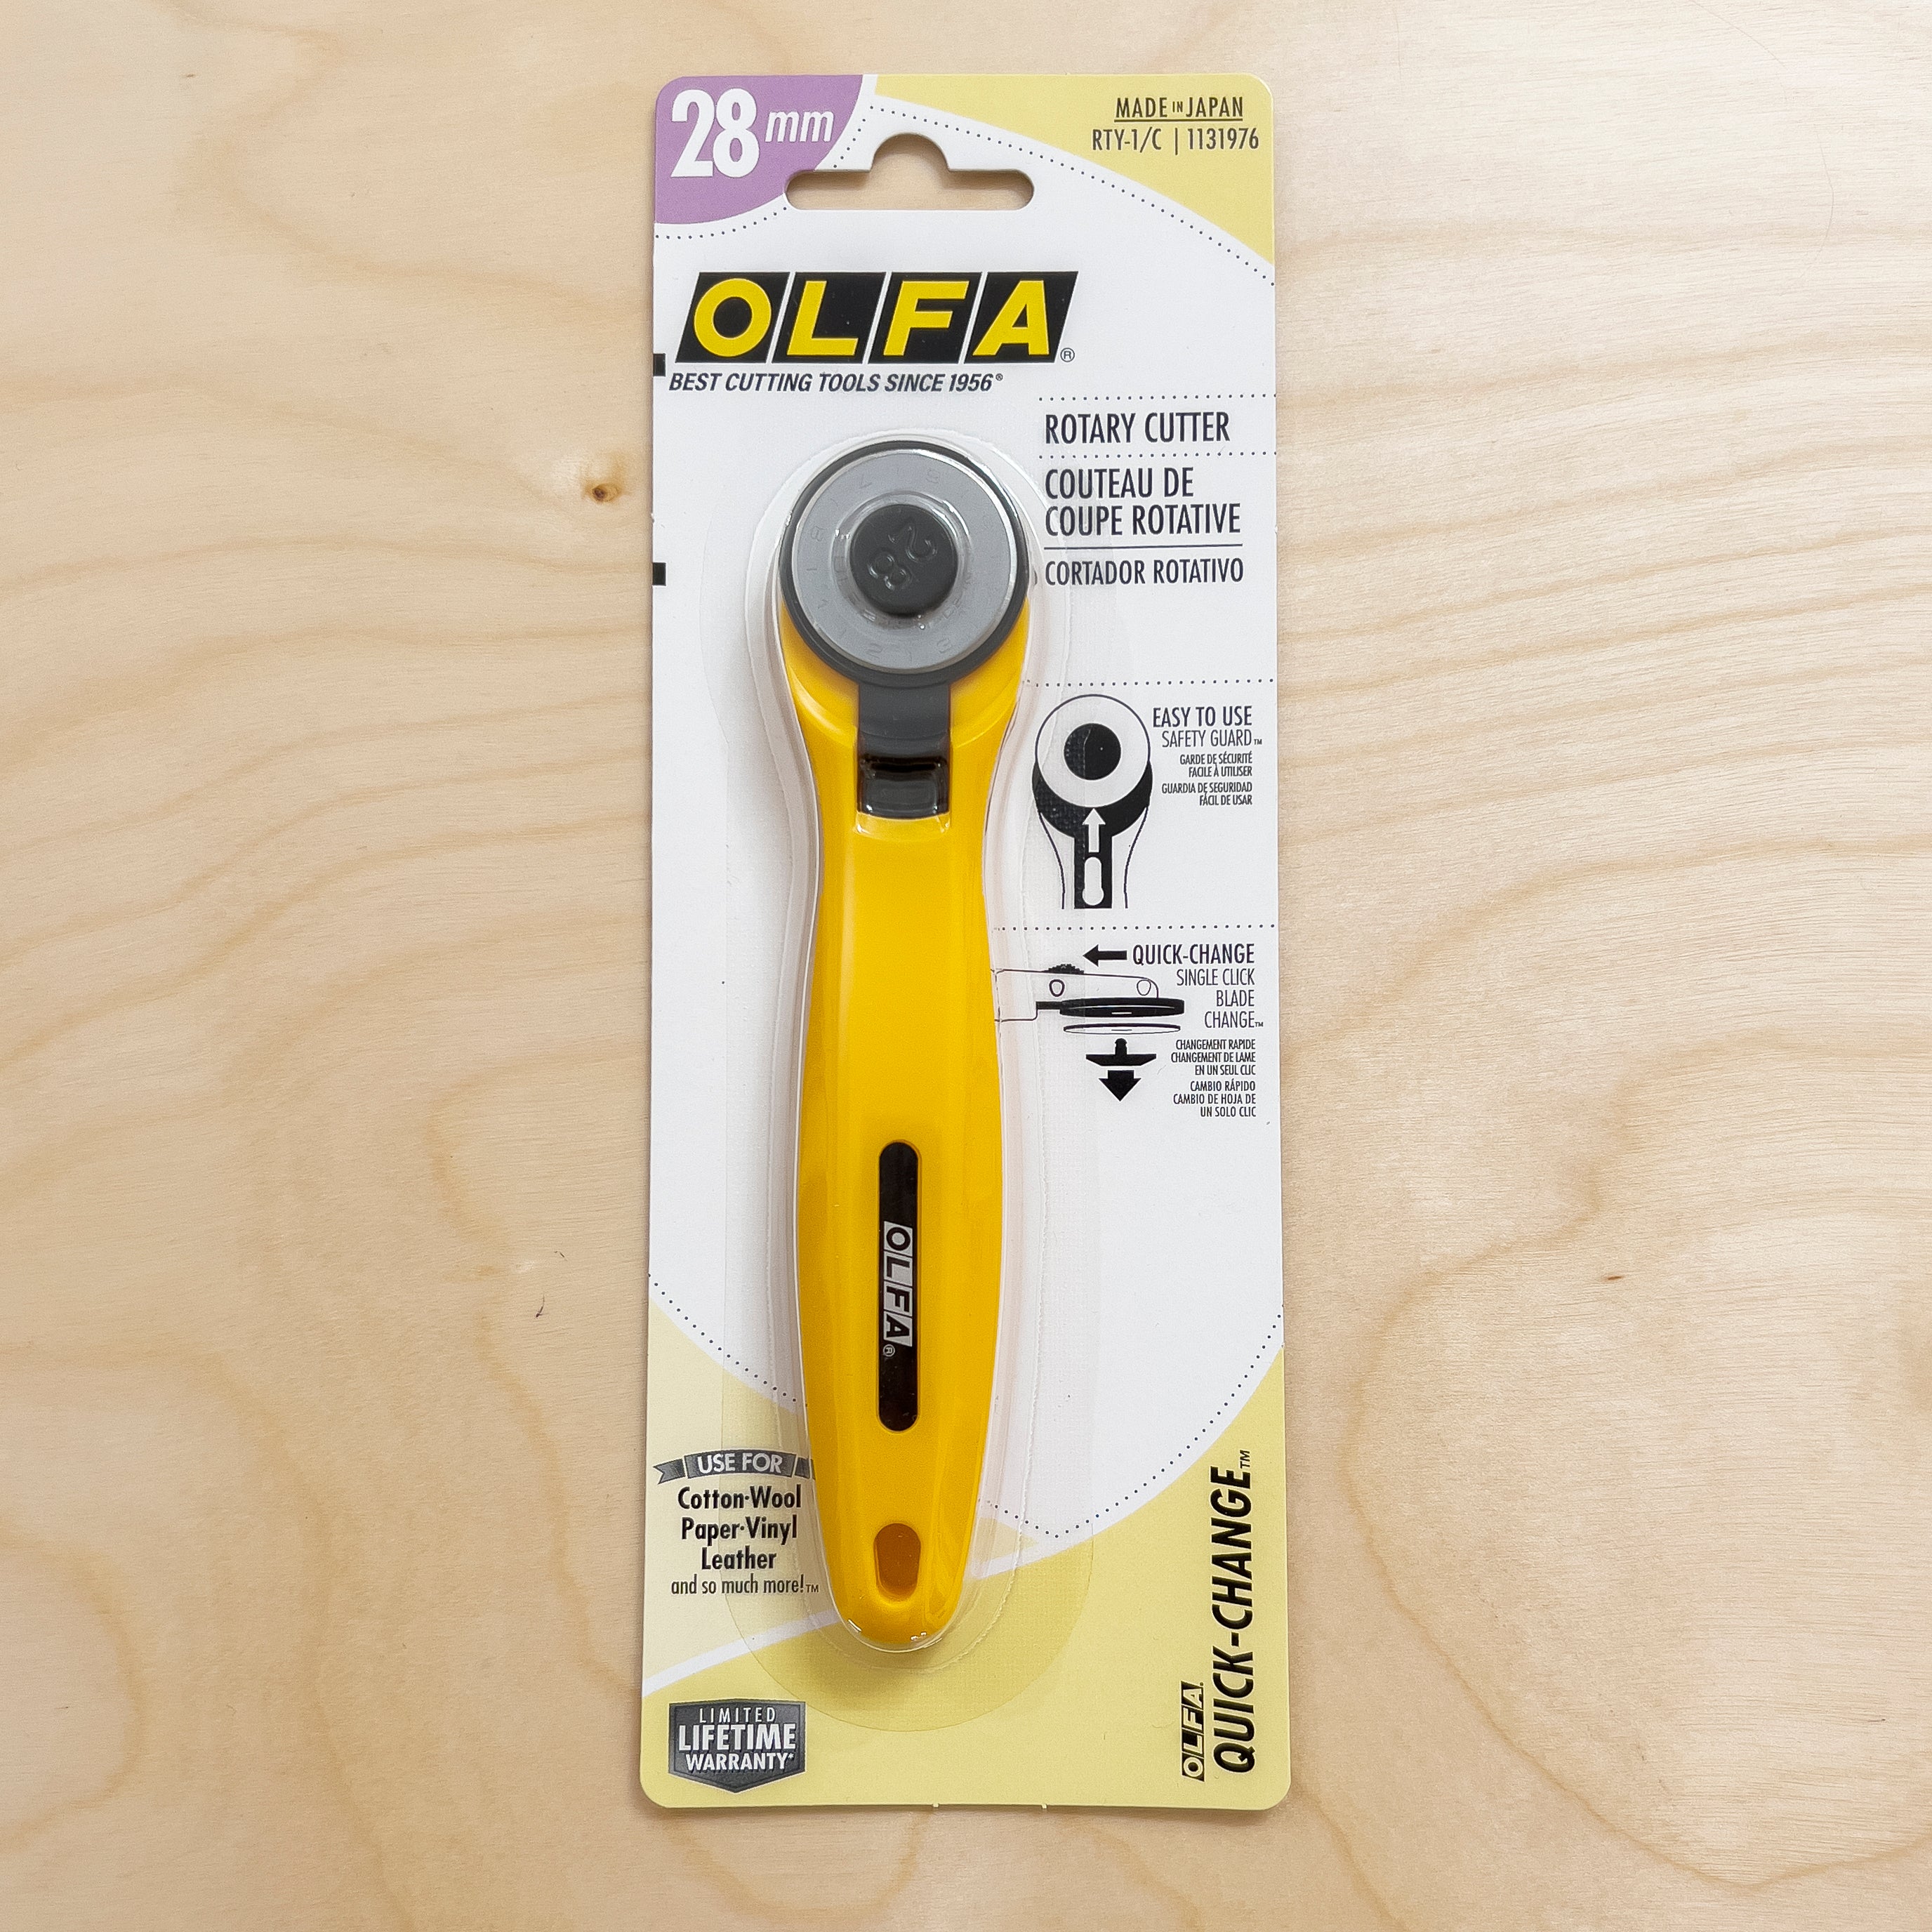  OLFA 18mm Quick-Change Rotary Cutter (RTY-4) - Rotary